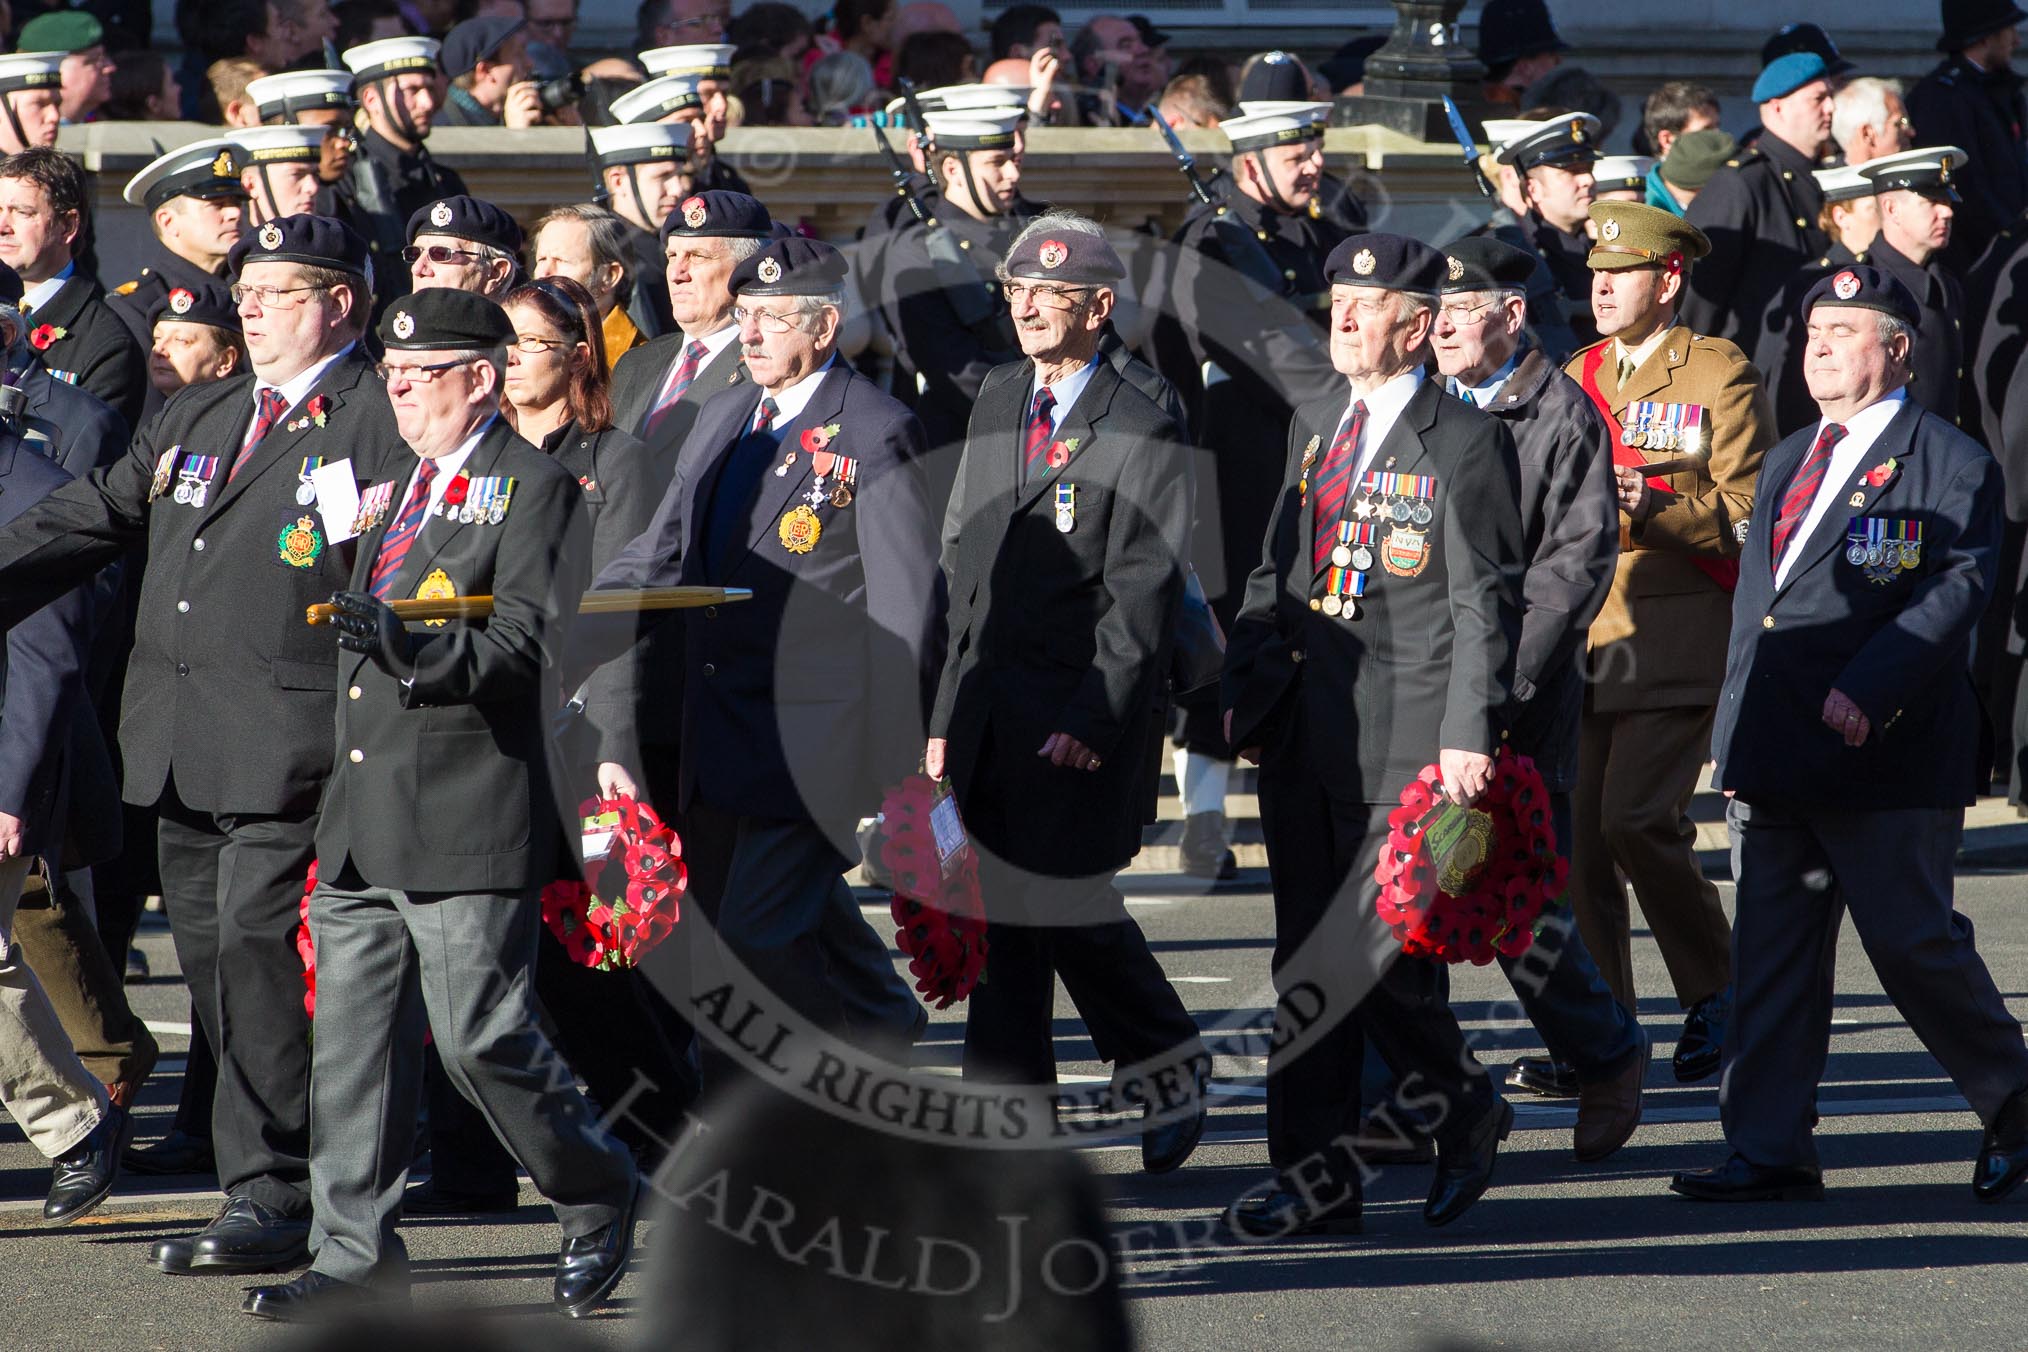 Remembrance Sunday 2012 Cenotaph March Past: Group B26 - Royal Engineers Association..
Whitehall, Cenotaph,
London SW1,

United Kingdom,
on 11 November 2012 at 11:58, image #982